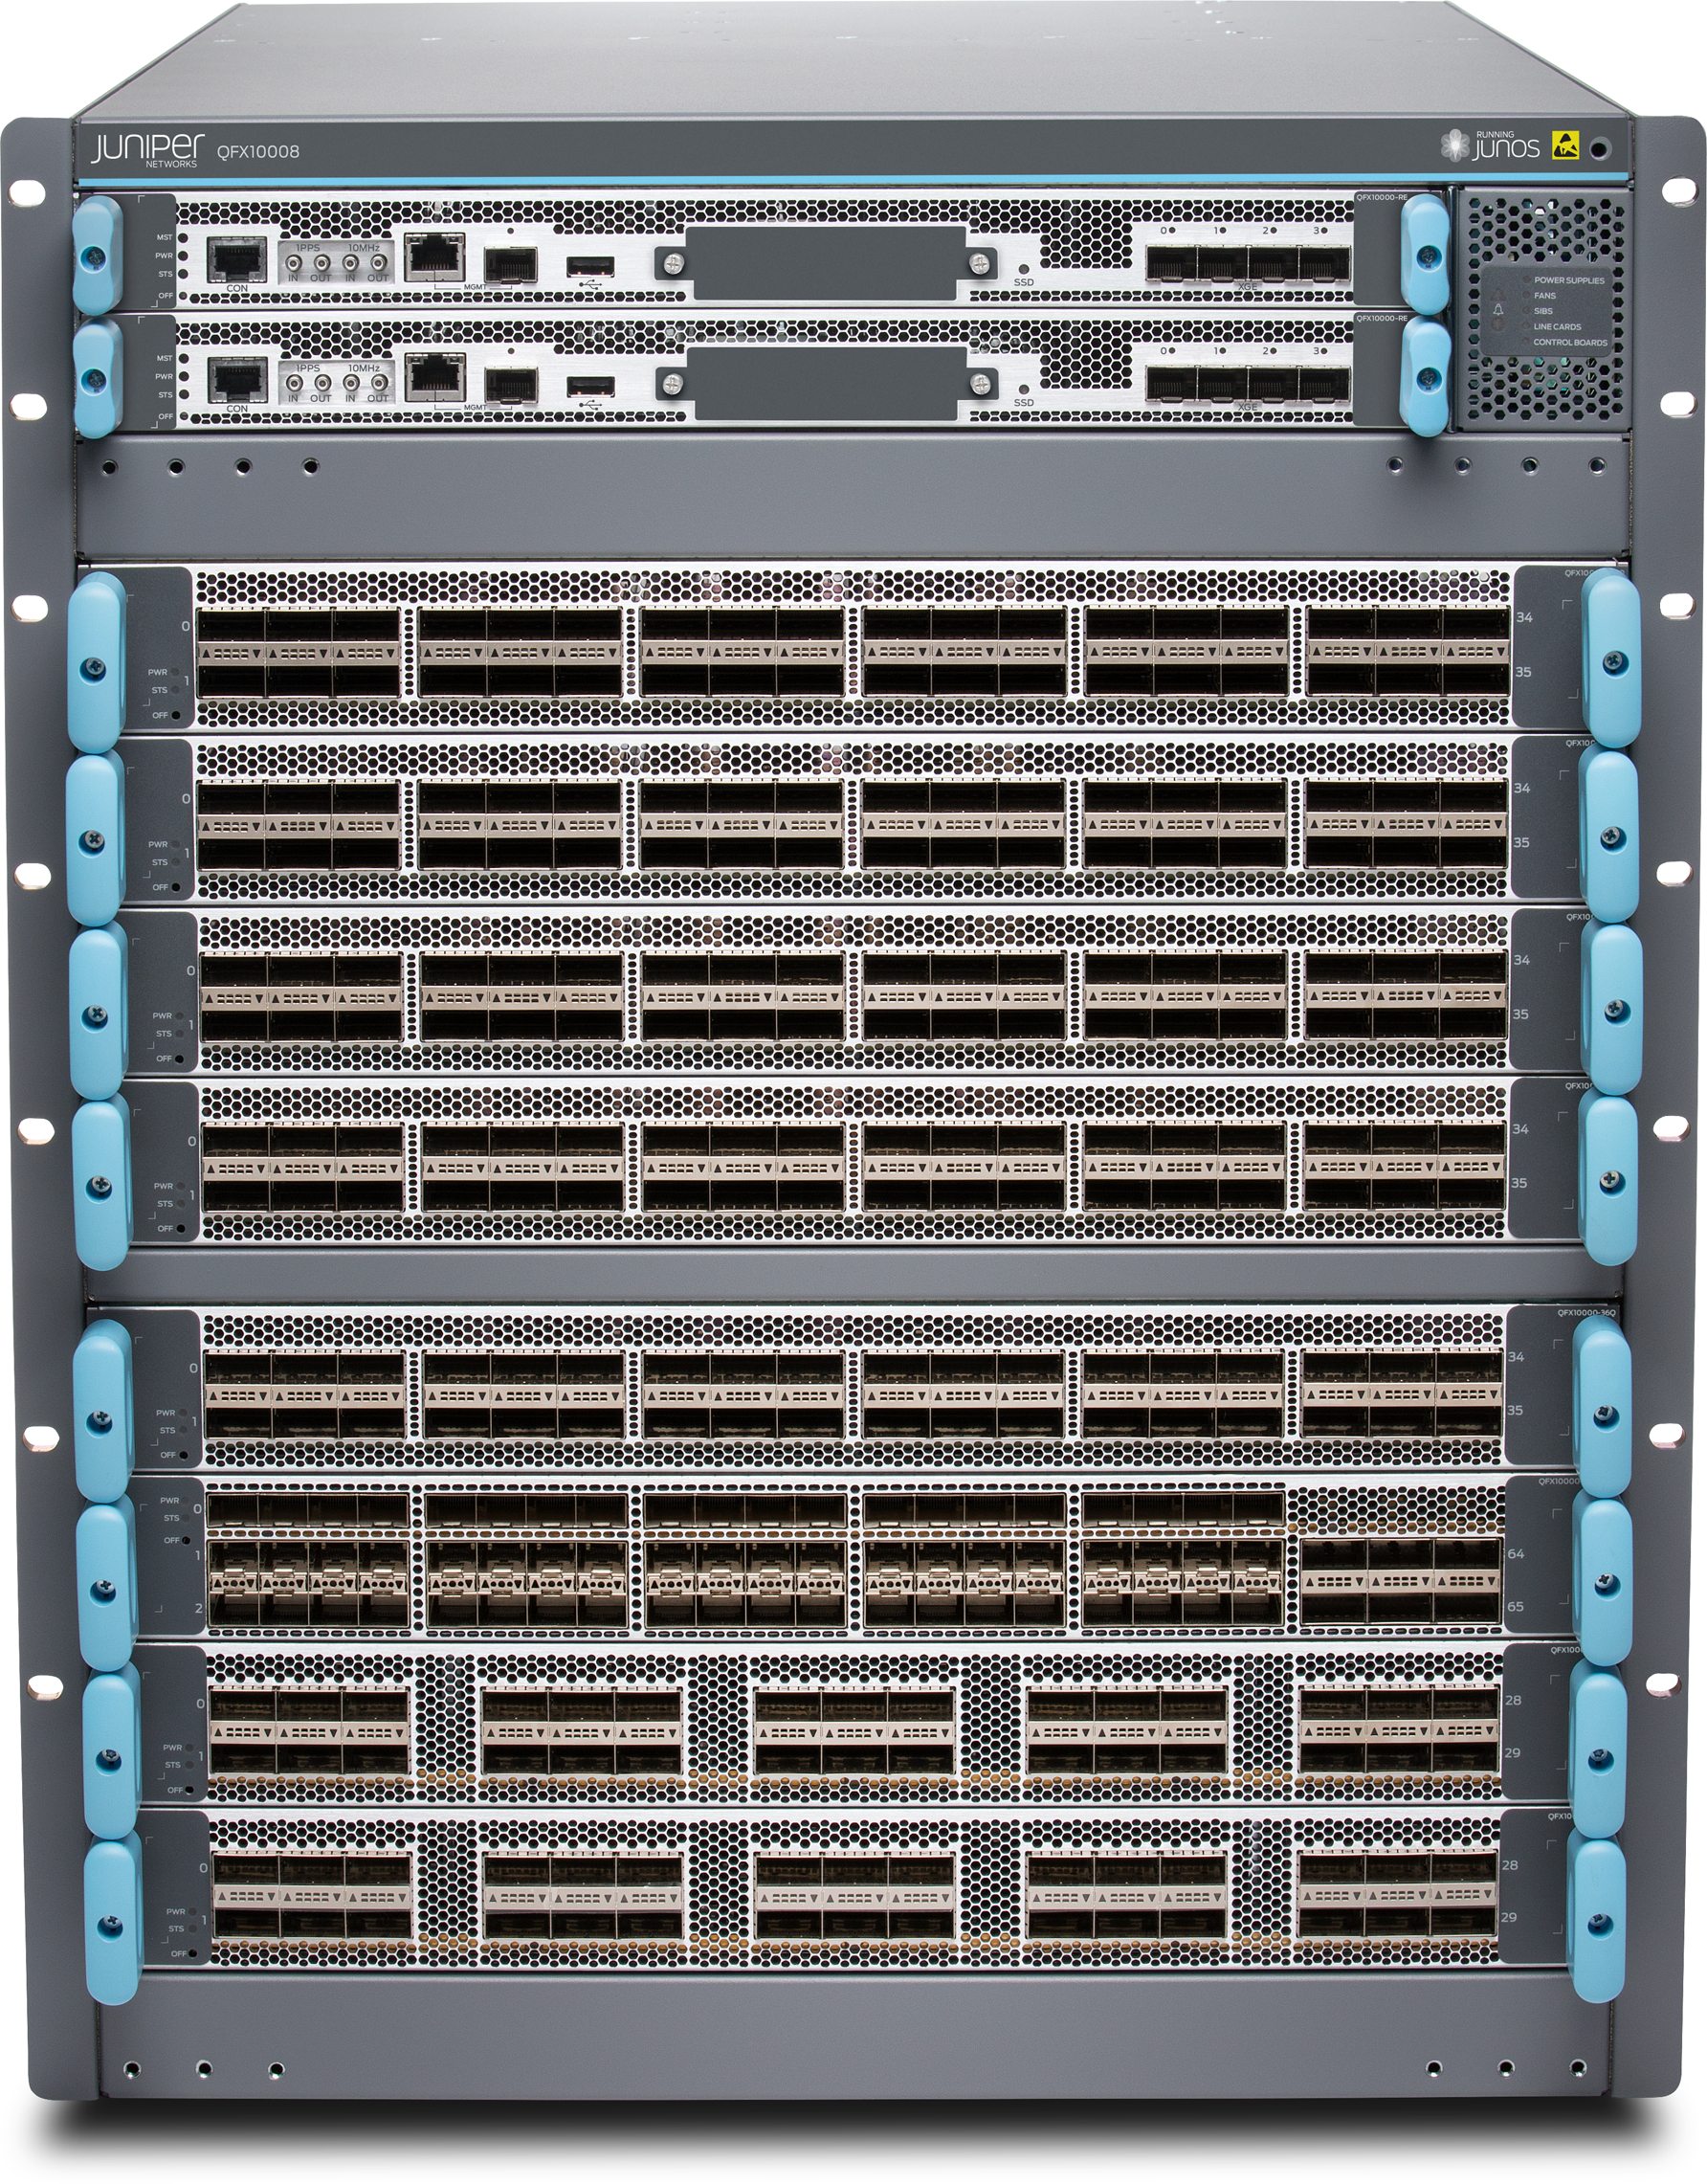 The Juniper QFX10008 chassis switch